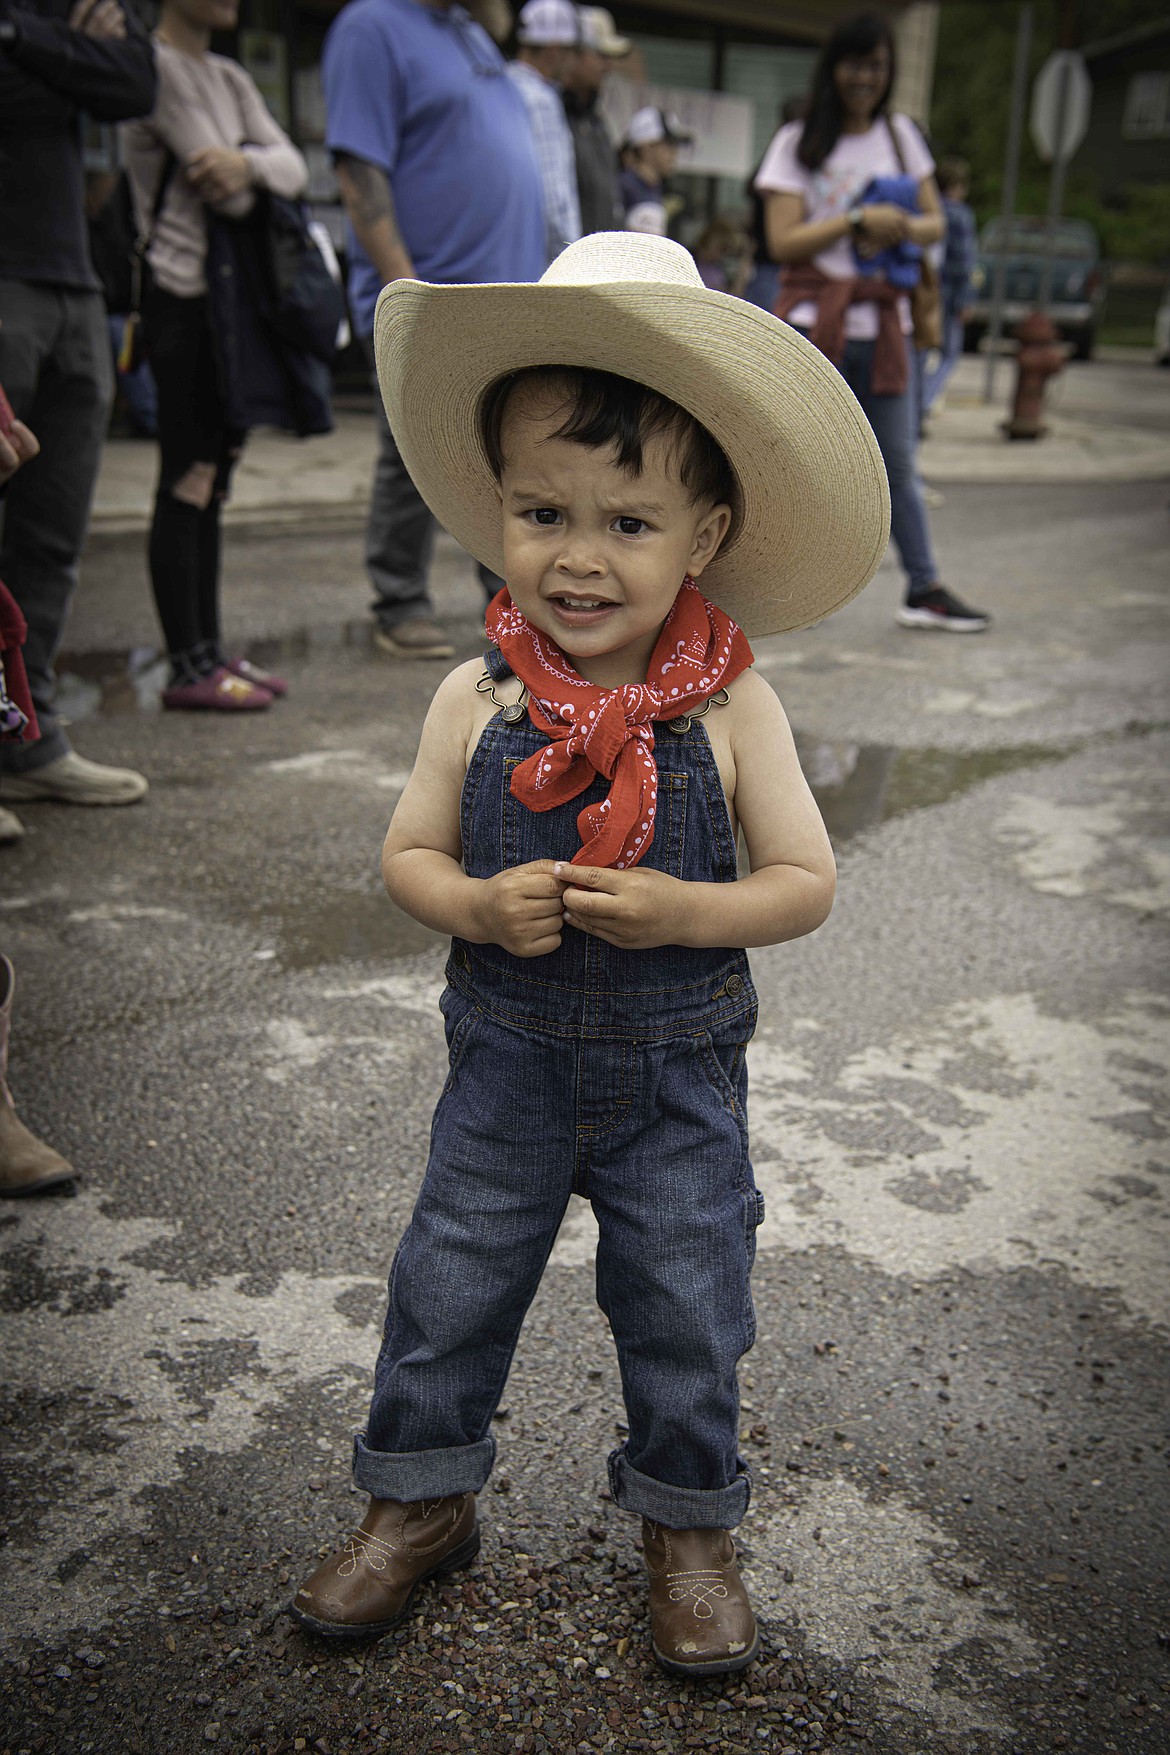 Tomas Bras is the 2-year-old winner of Homesteader Category in the kiddie parade at Homesteader Days in Hot Springs. (Tracy Scott/Valley Press)